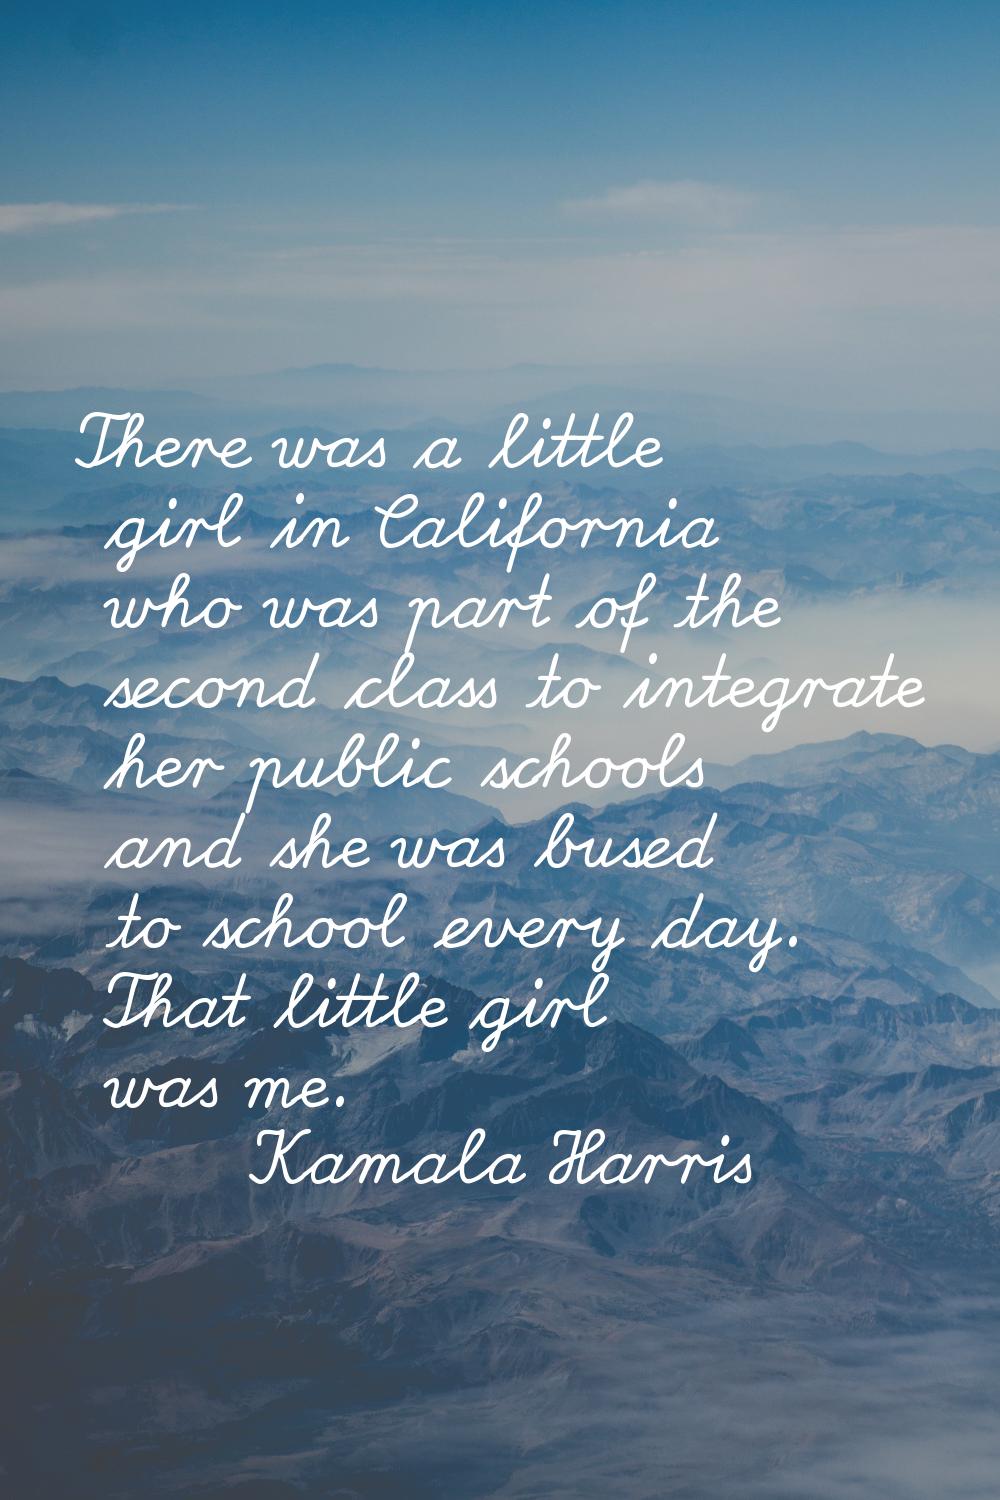 There was a little girl in California who was part of the second class to integrate her public scho